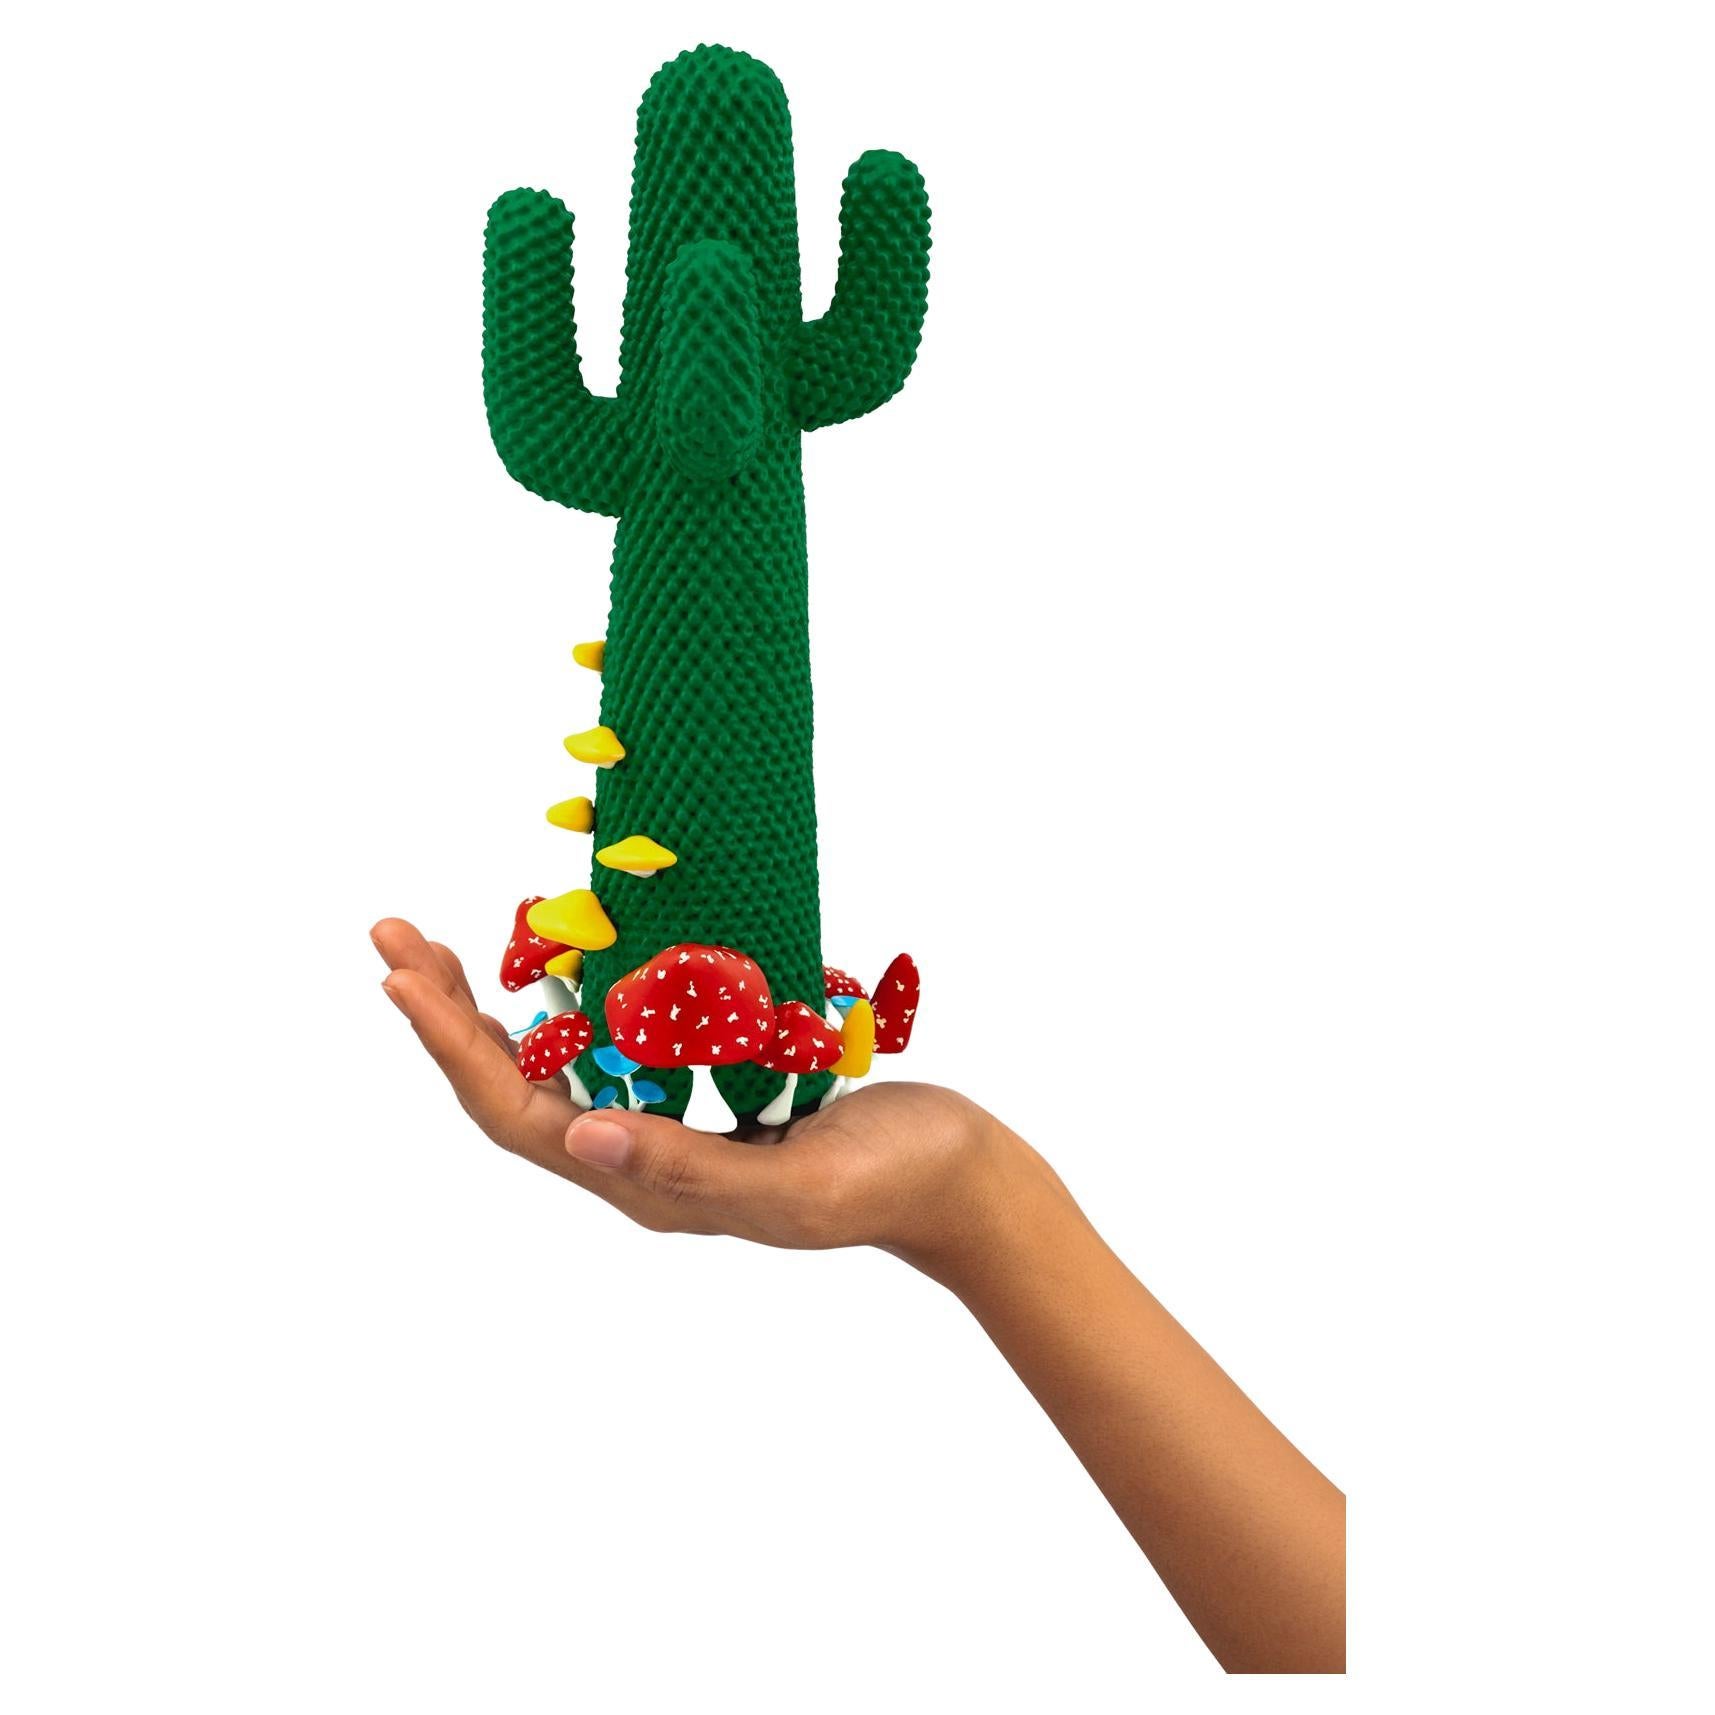 Limited Edition #51/99

Gufram presents the miniaturised version of the Shroom CACTUS® created in collaboration with A$AP Rocky and the artist’s new design studio HOMMEMADE Exactly as the real-size Shroom CACTUS®, the new Guframini piece features